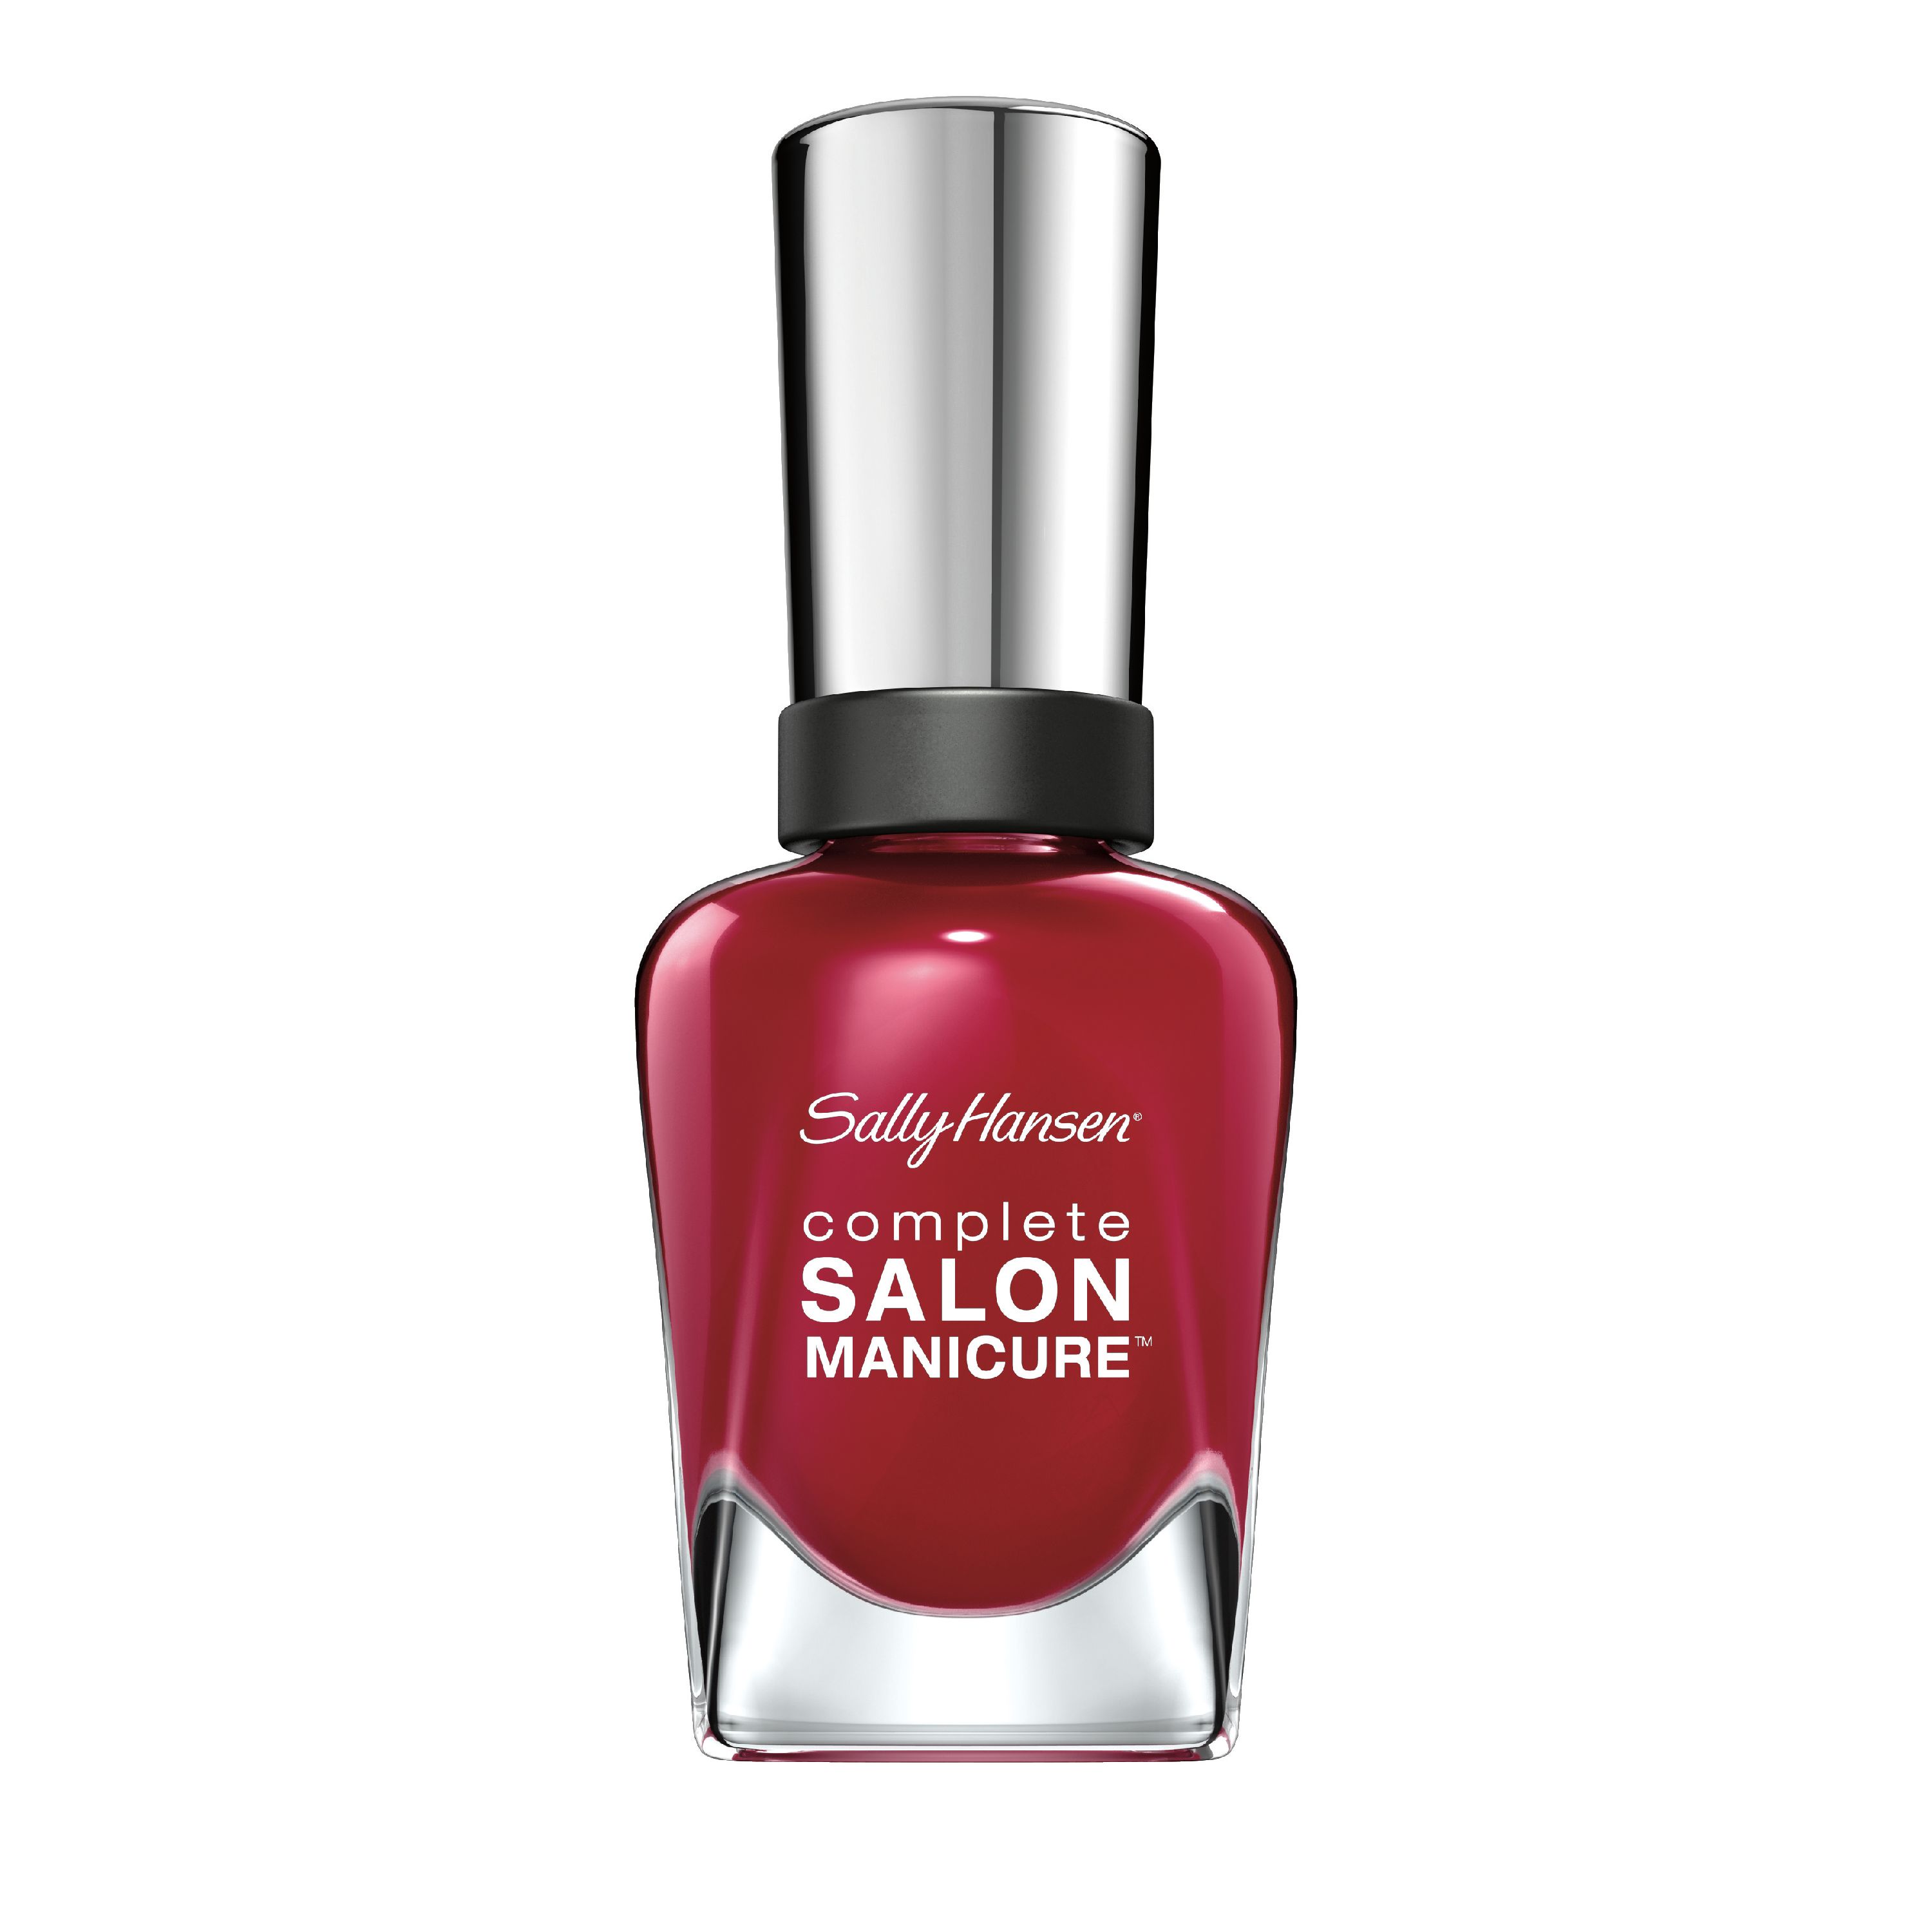 Sally Hansen Complete Salon Manicure Nail Polish, Red-Handed - image 1 of 1